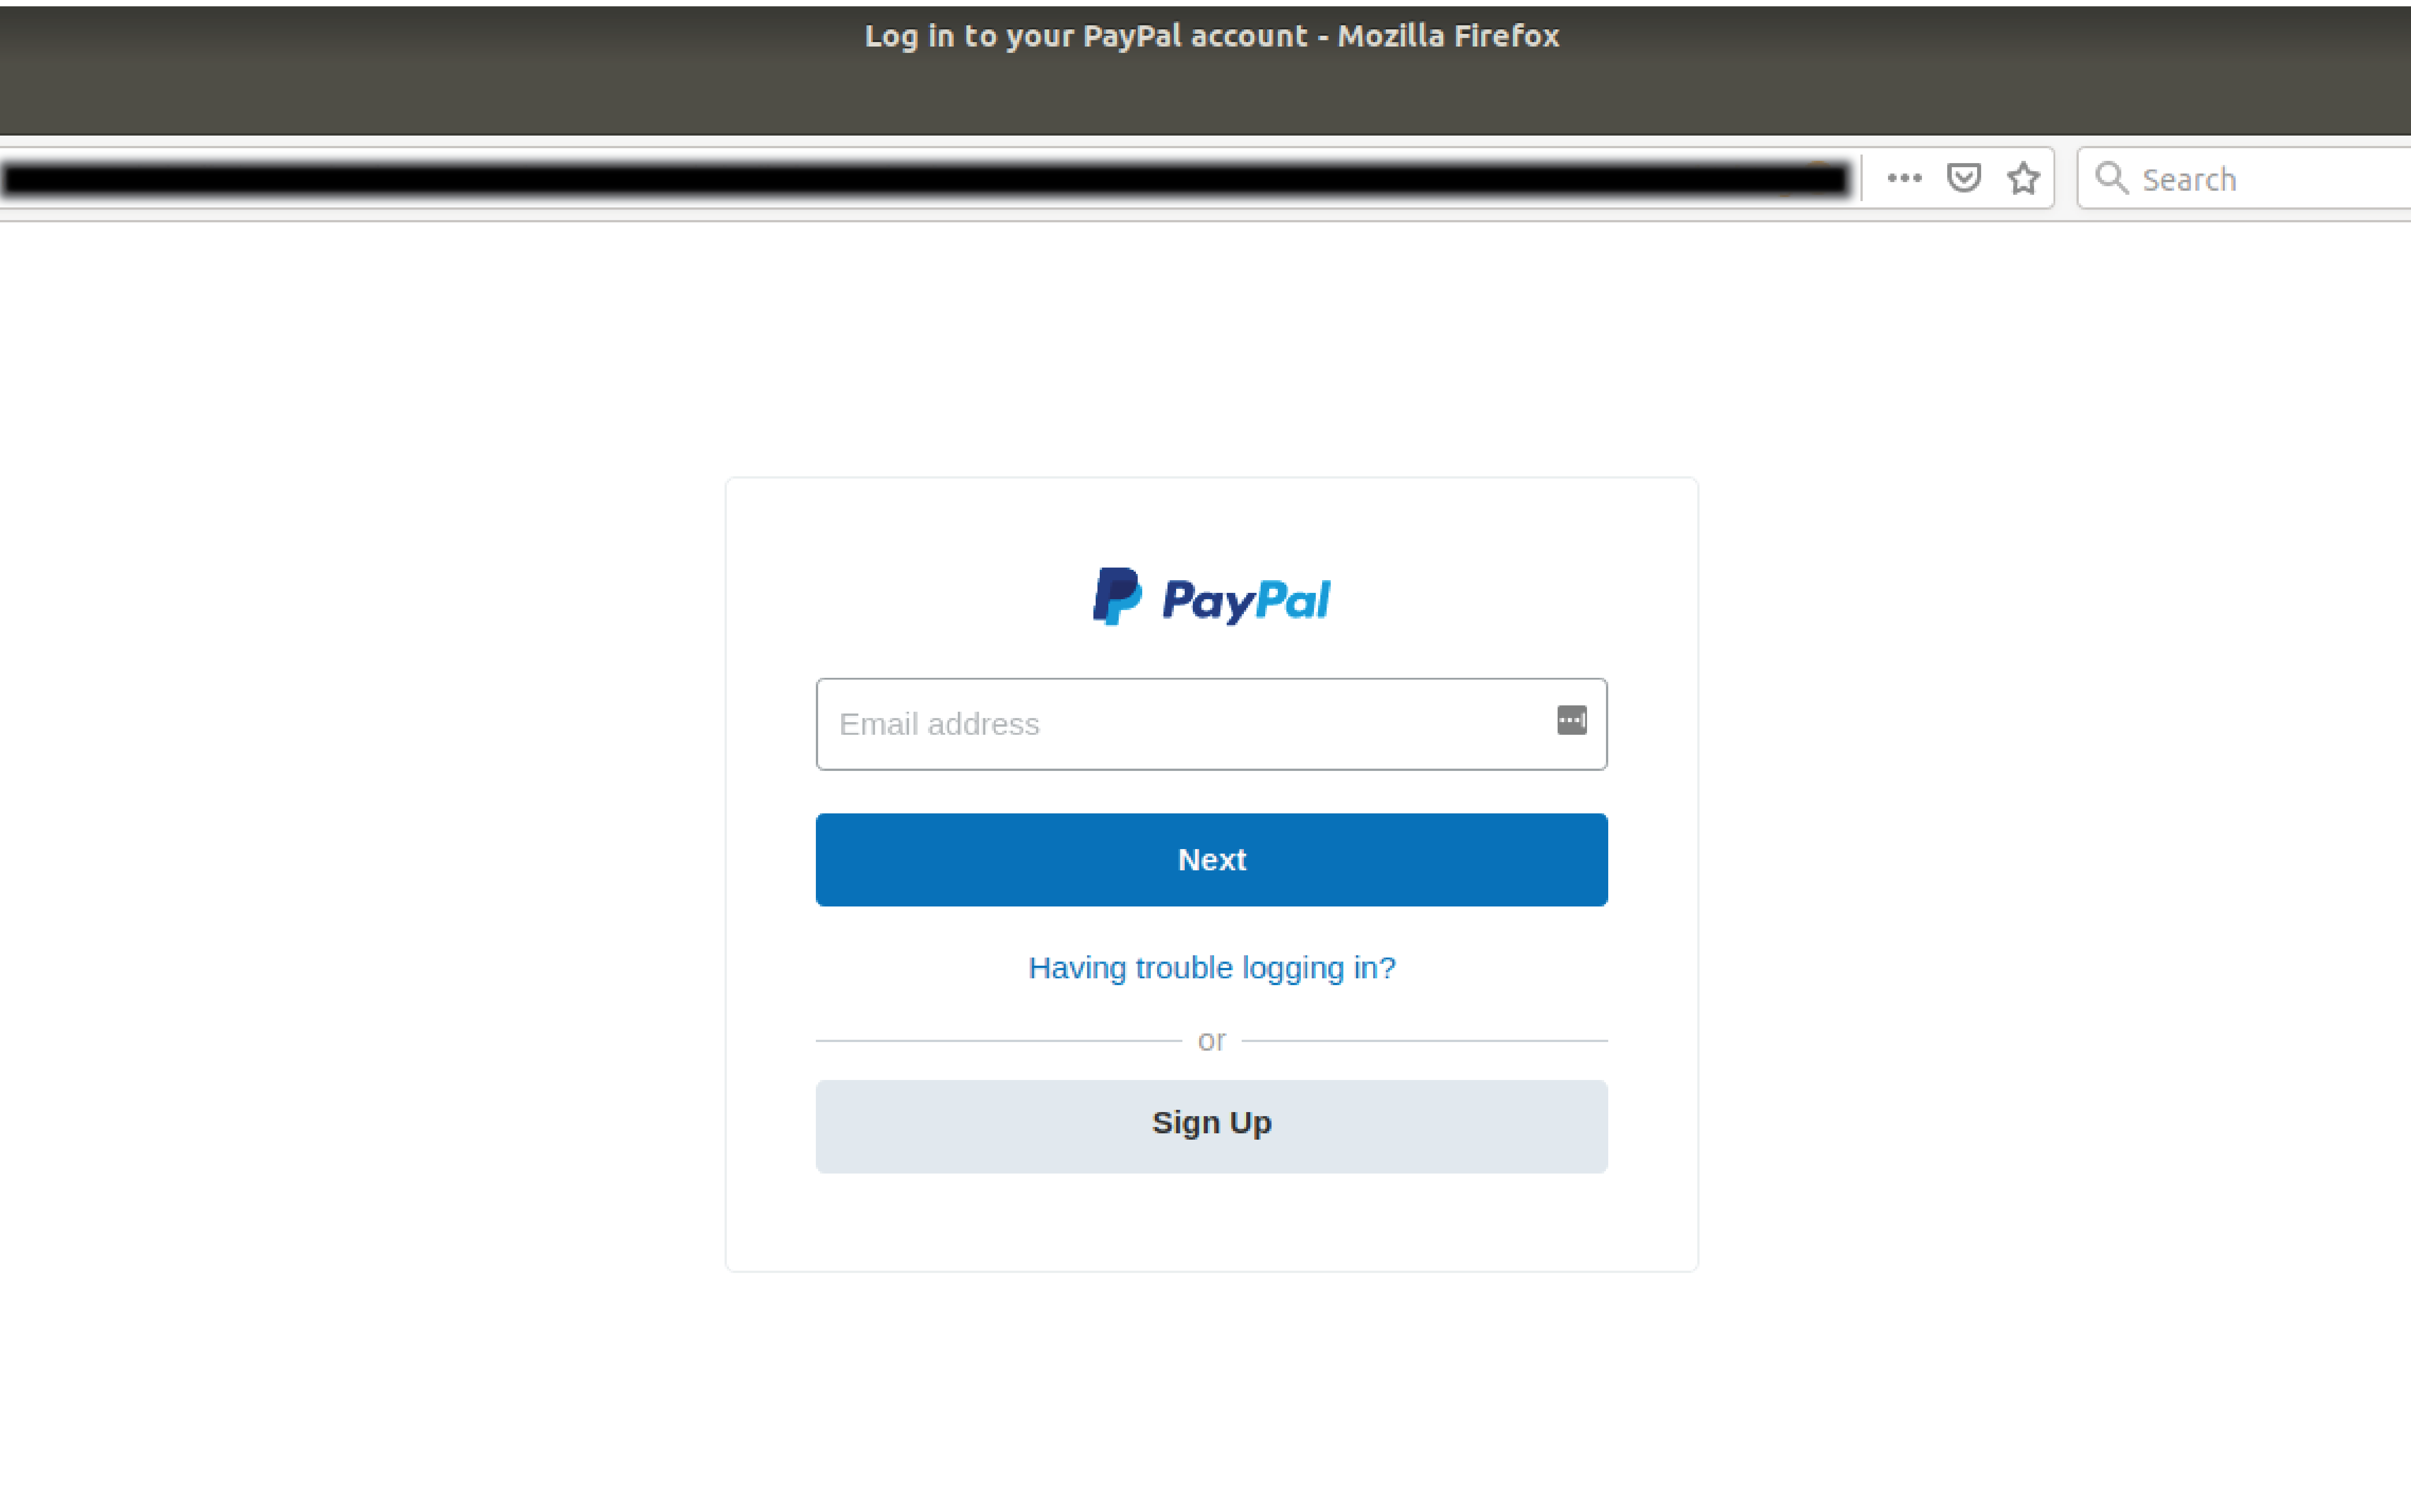 paypal-scam-pic2-login-01